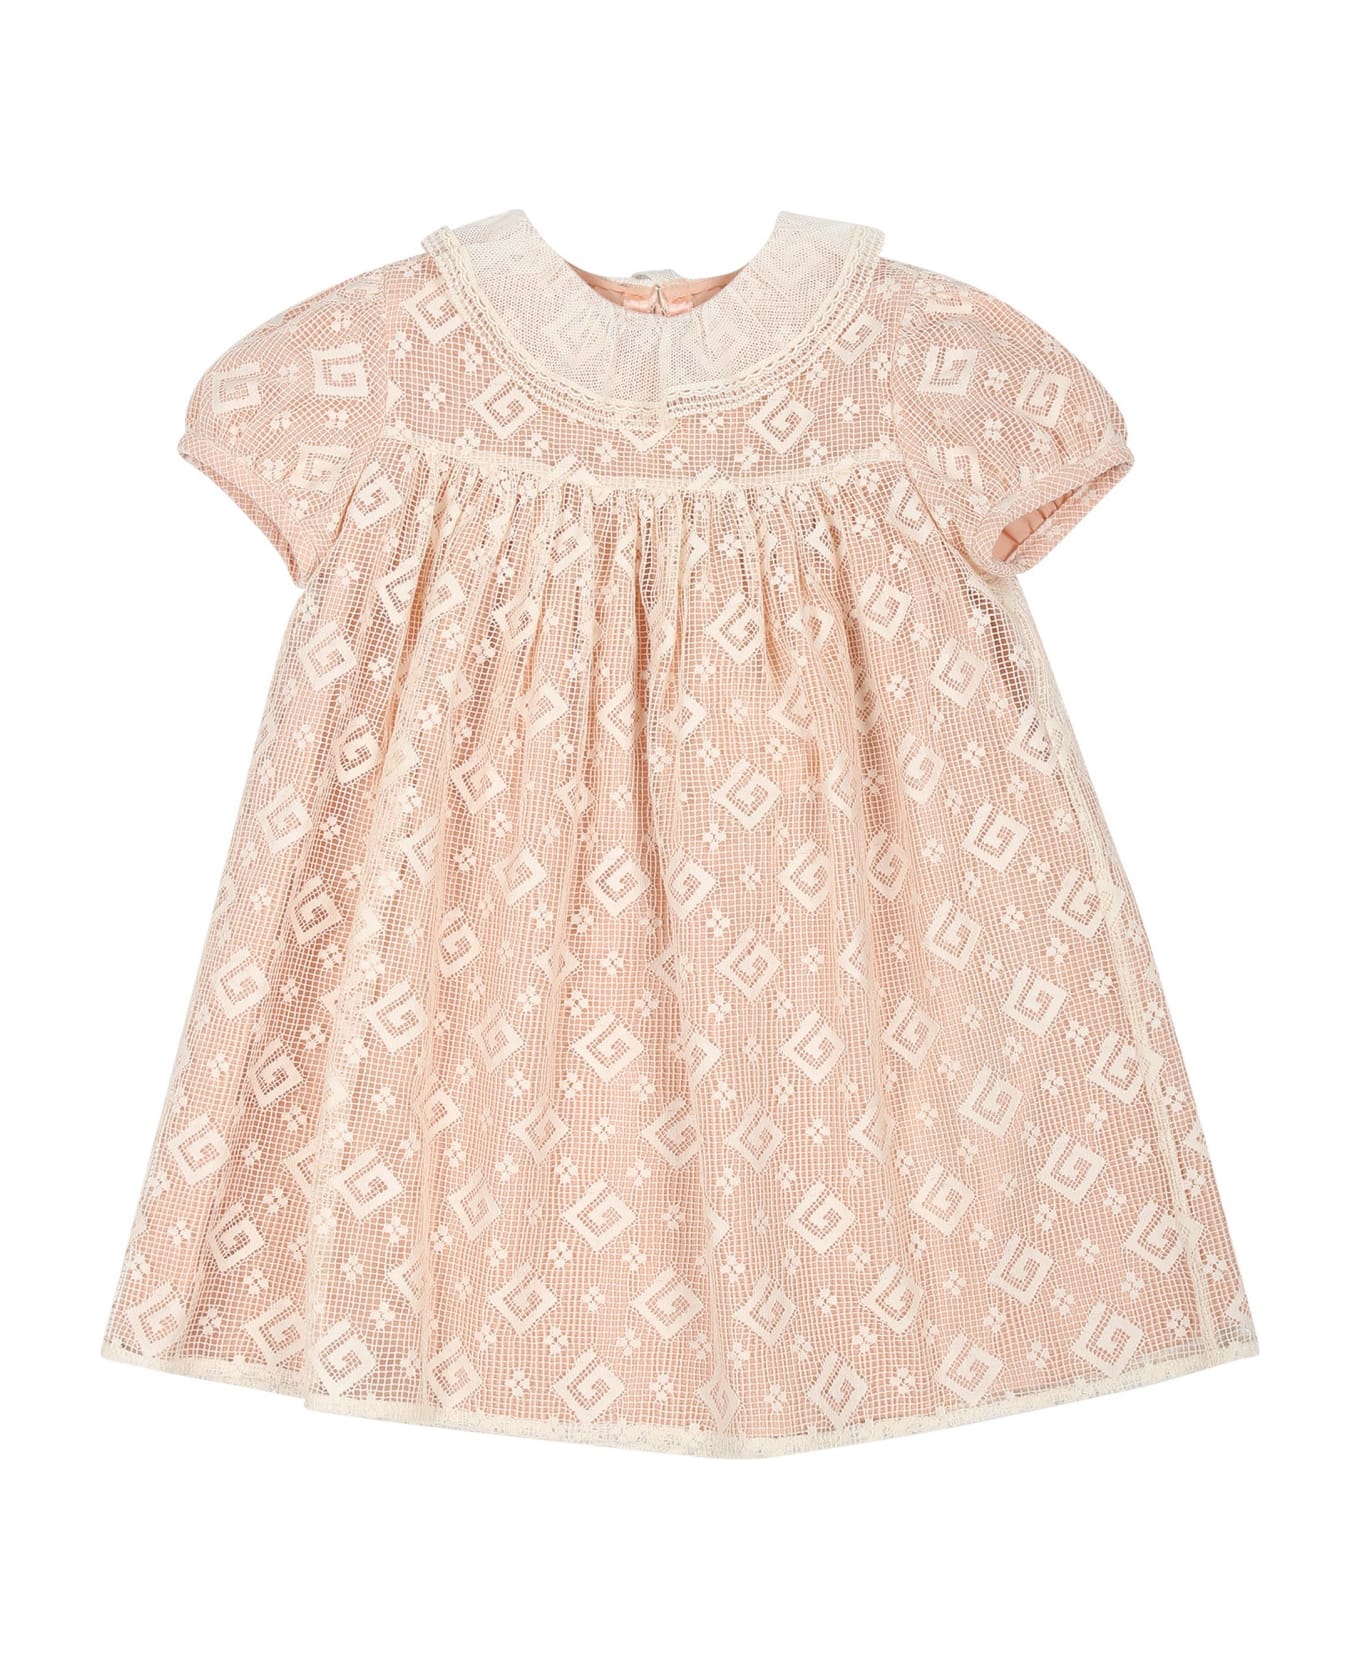 Gucci Pink Dress For Baby Girl With G Quadro Motif - Pink